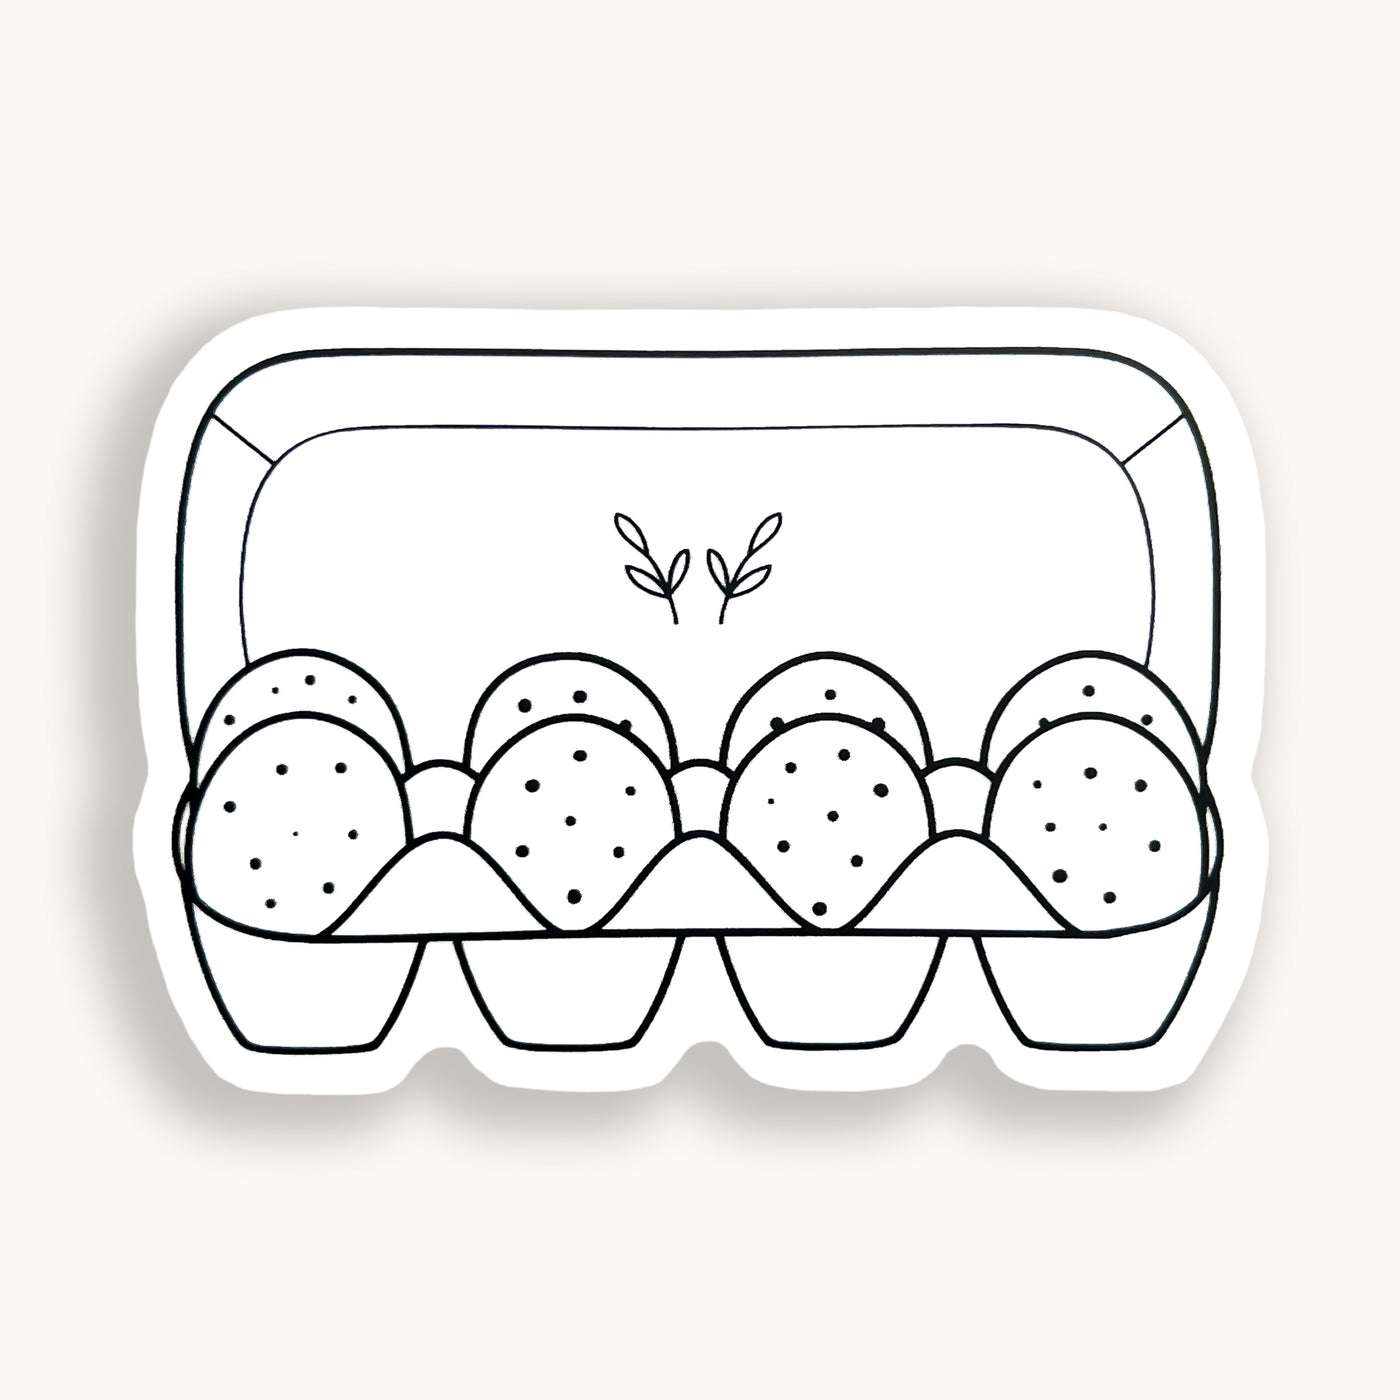 Line drawn eggs clear vinyl sticker comes with a solid white backing by Simpliday Paper, Olga Nagorna.